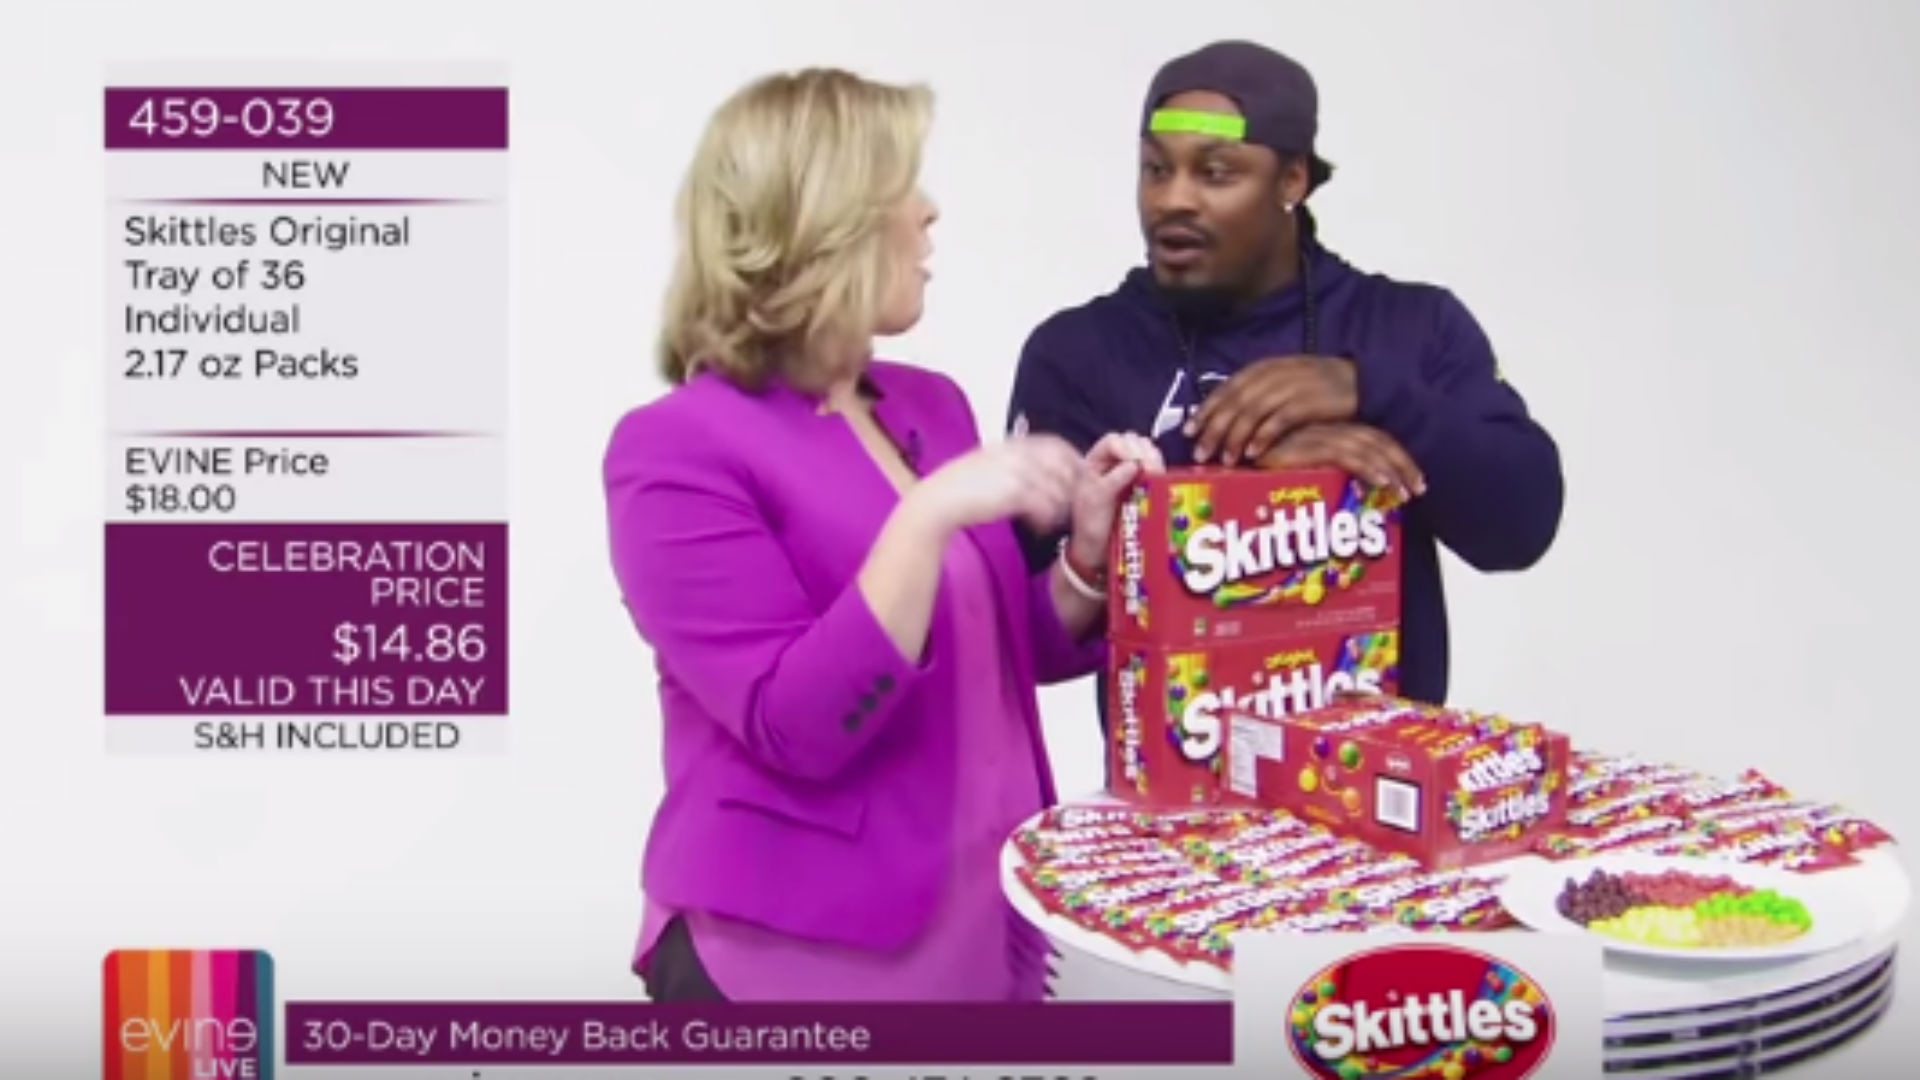 1920x1080 Marshawn Lynch sells Skittles in hilarious home shopping channel video |  NFL | Sporting News